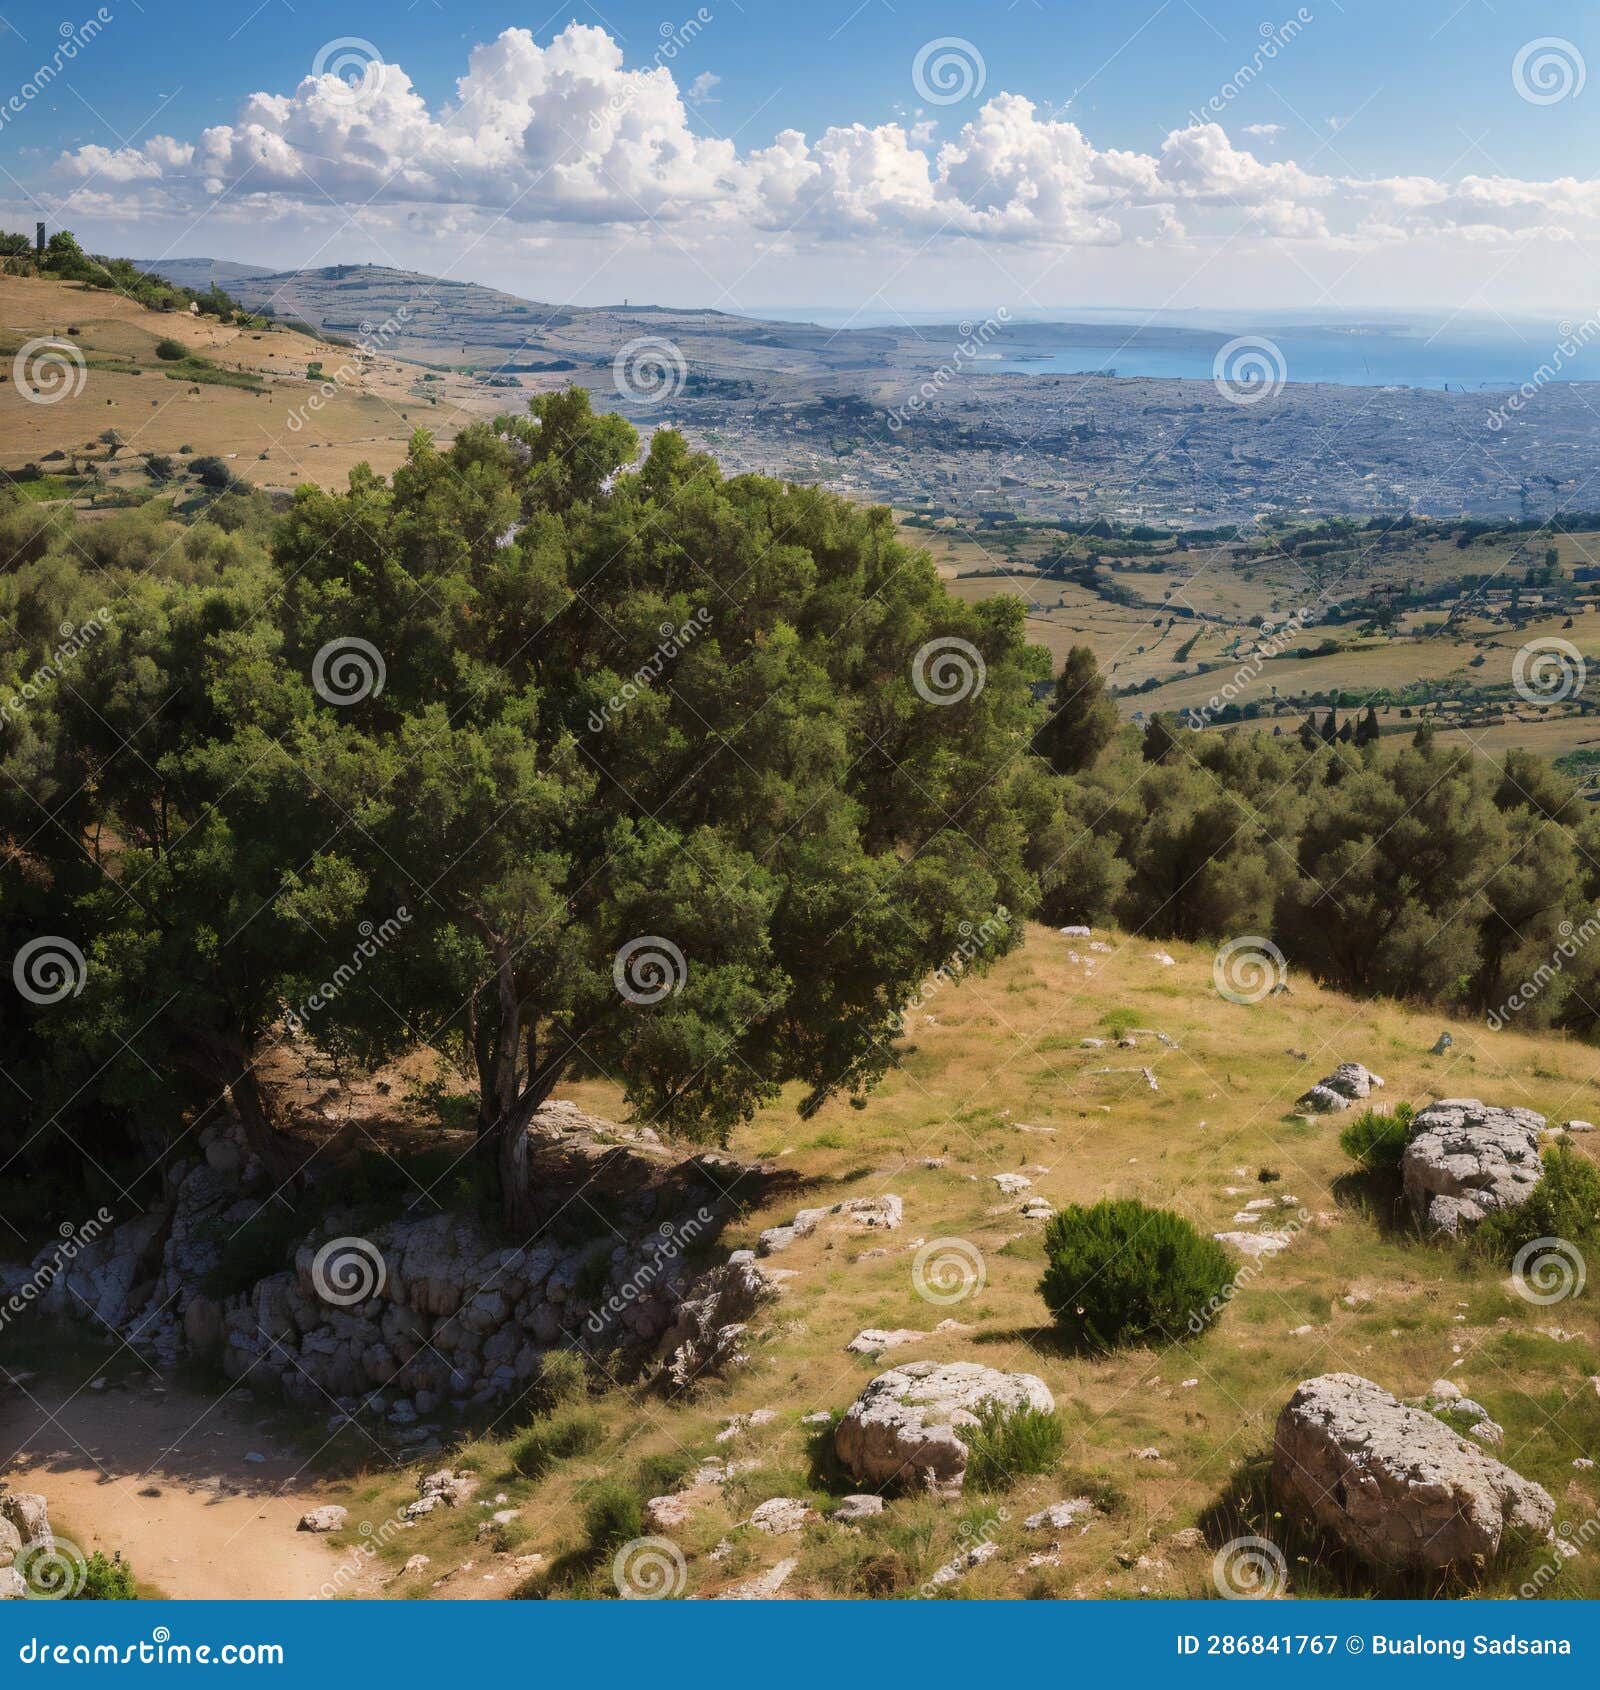 panoramic view of the upper galilee, and southern lebanon, from adir mountain, northern israel made with